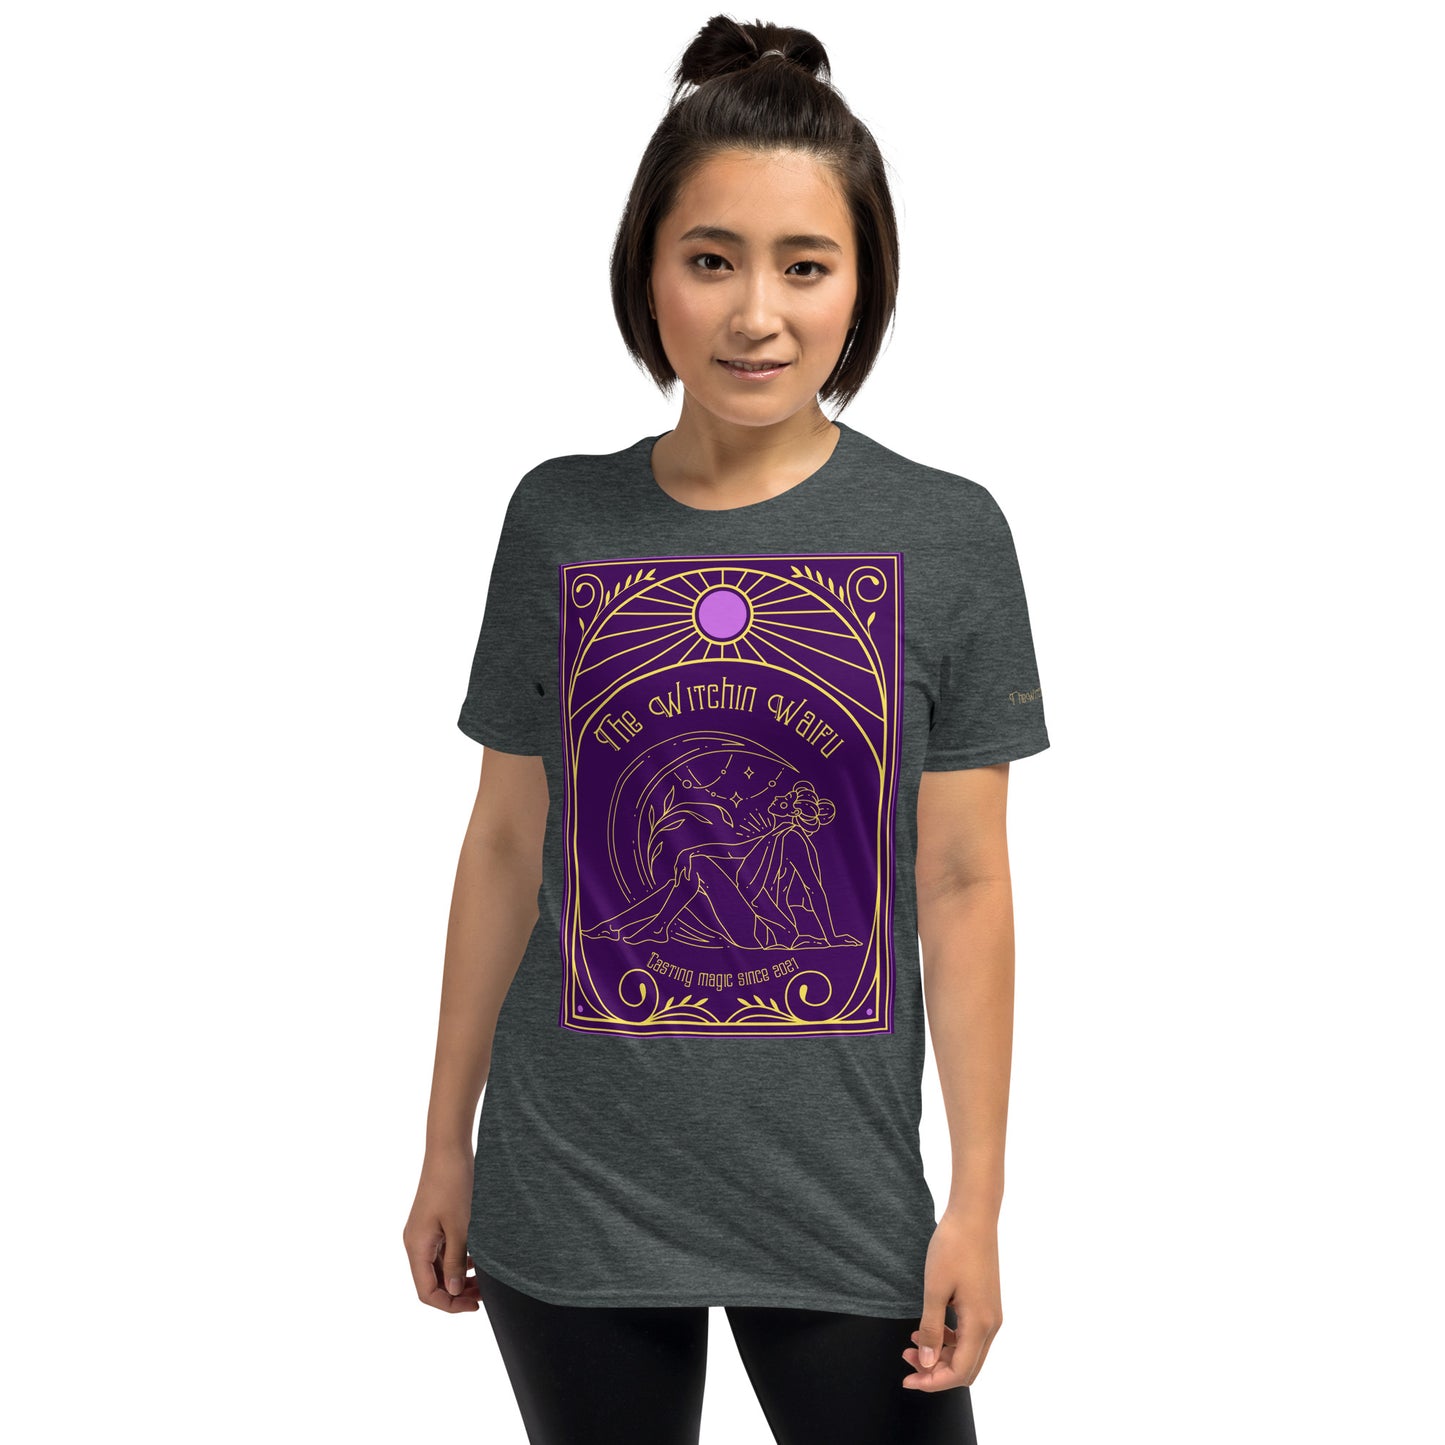 Witchin Waifu Tarot Card Short-Sleeve Unisex T-ShirtYou've now found the staple t-shirt of your wardrobe. It's made of 100% ring-spun cotton and is soft and comfy. The double stitching on the neckline and sleeves add Witchin Waifu